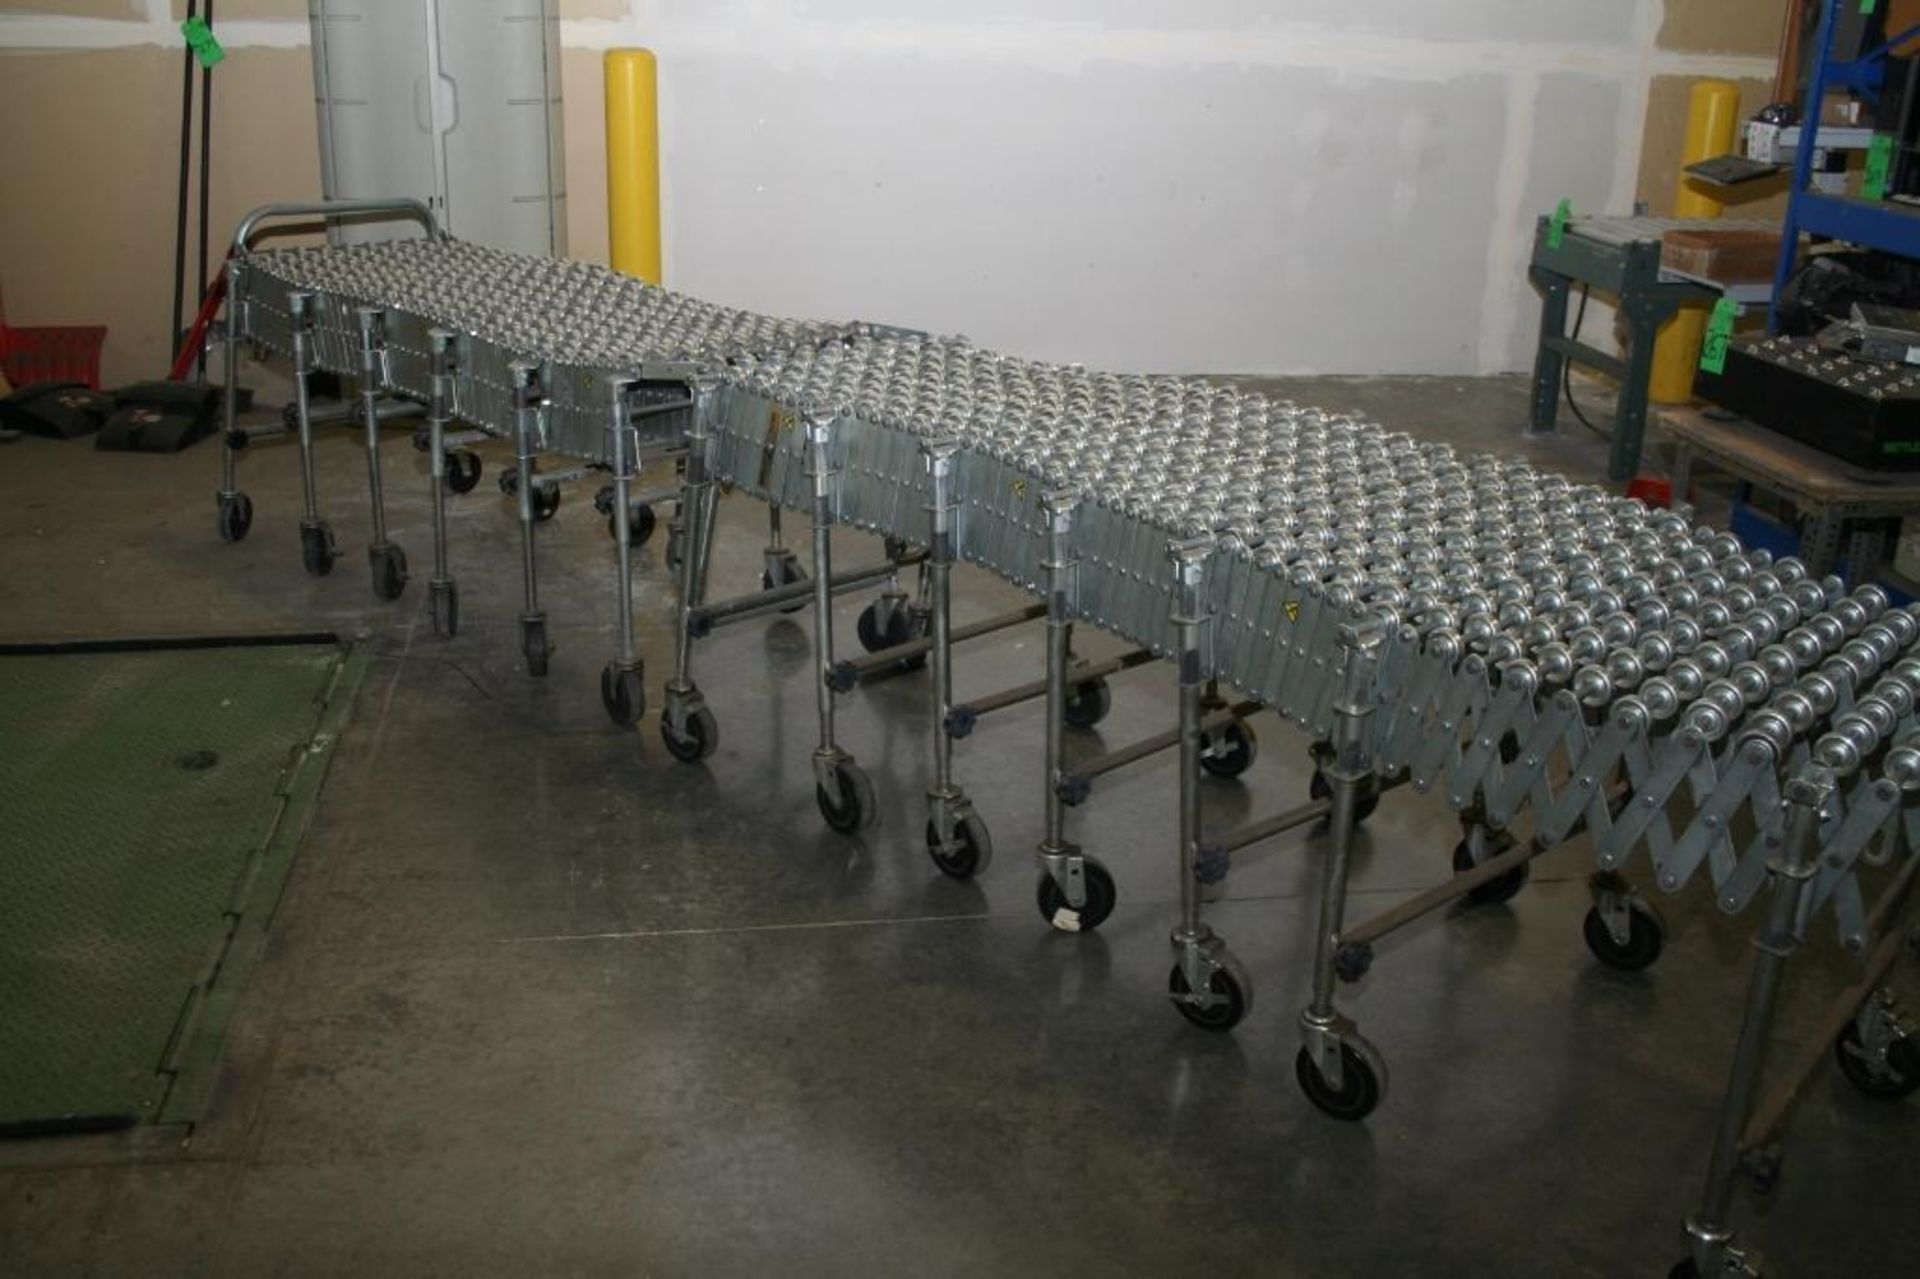 Nesta Flex 175 Flex Conveyor (2) Sections Attached Together 24" Wide, Located at 3002 North Apollo D - Image 2 of 3